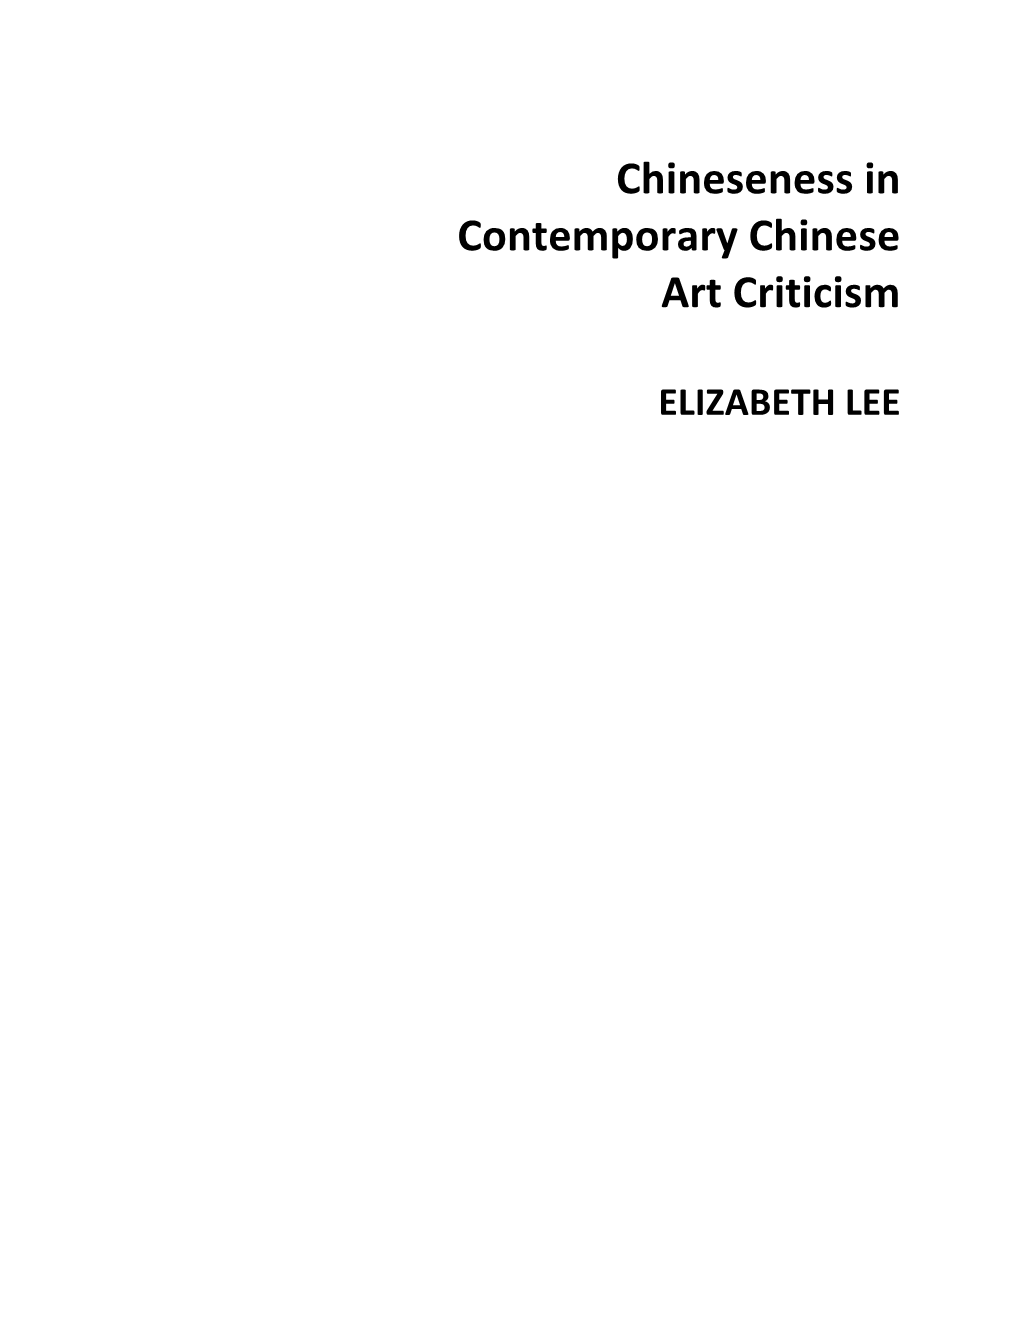 Chineseness in Contemporary Chinese Art Criticism